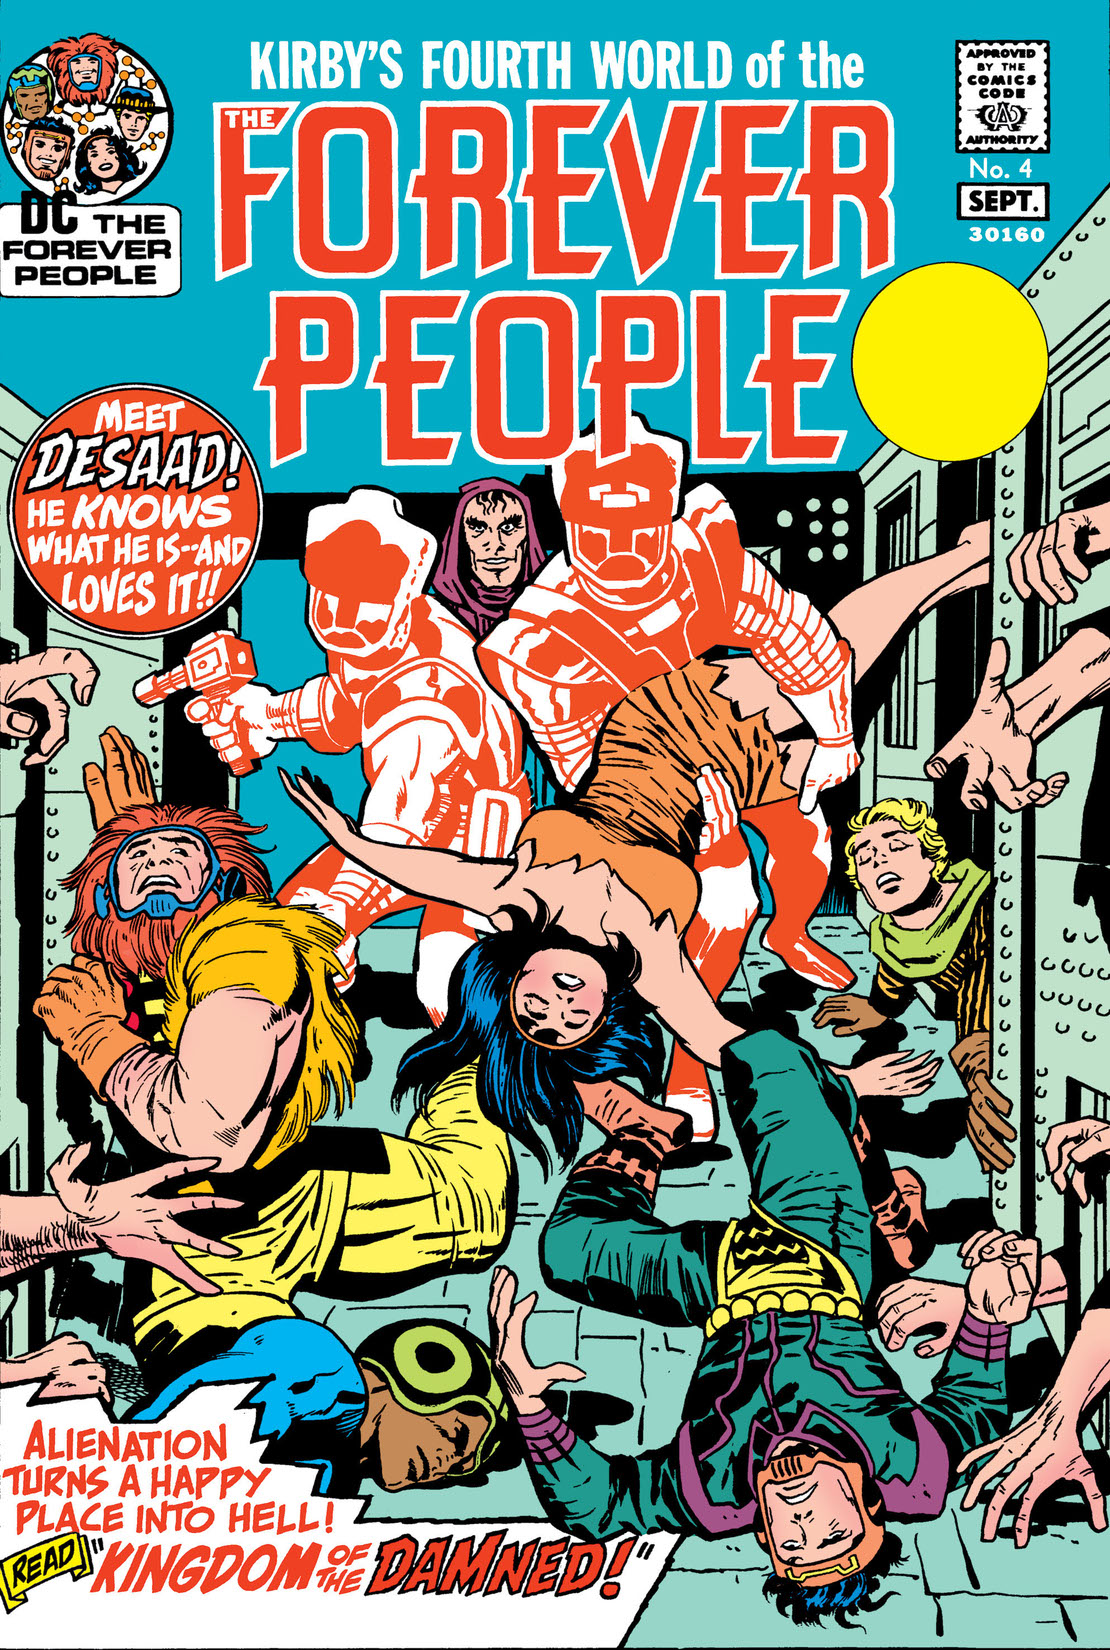 The Forever People #4 preview images